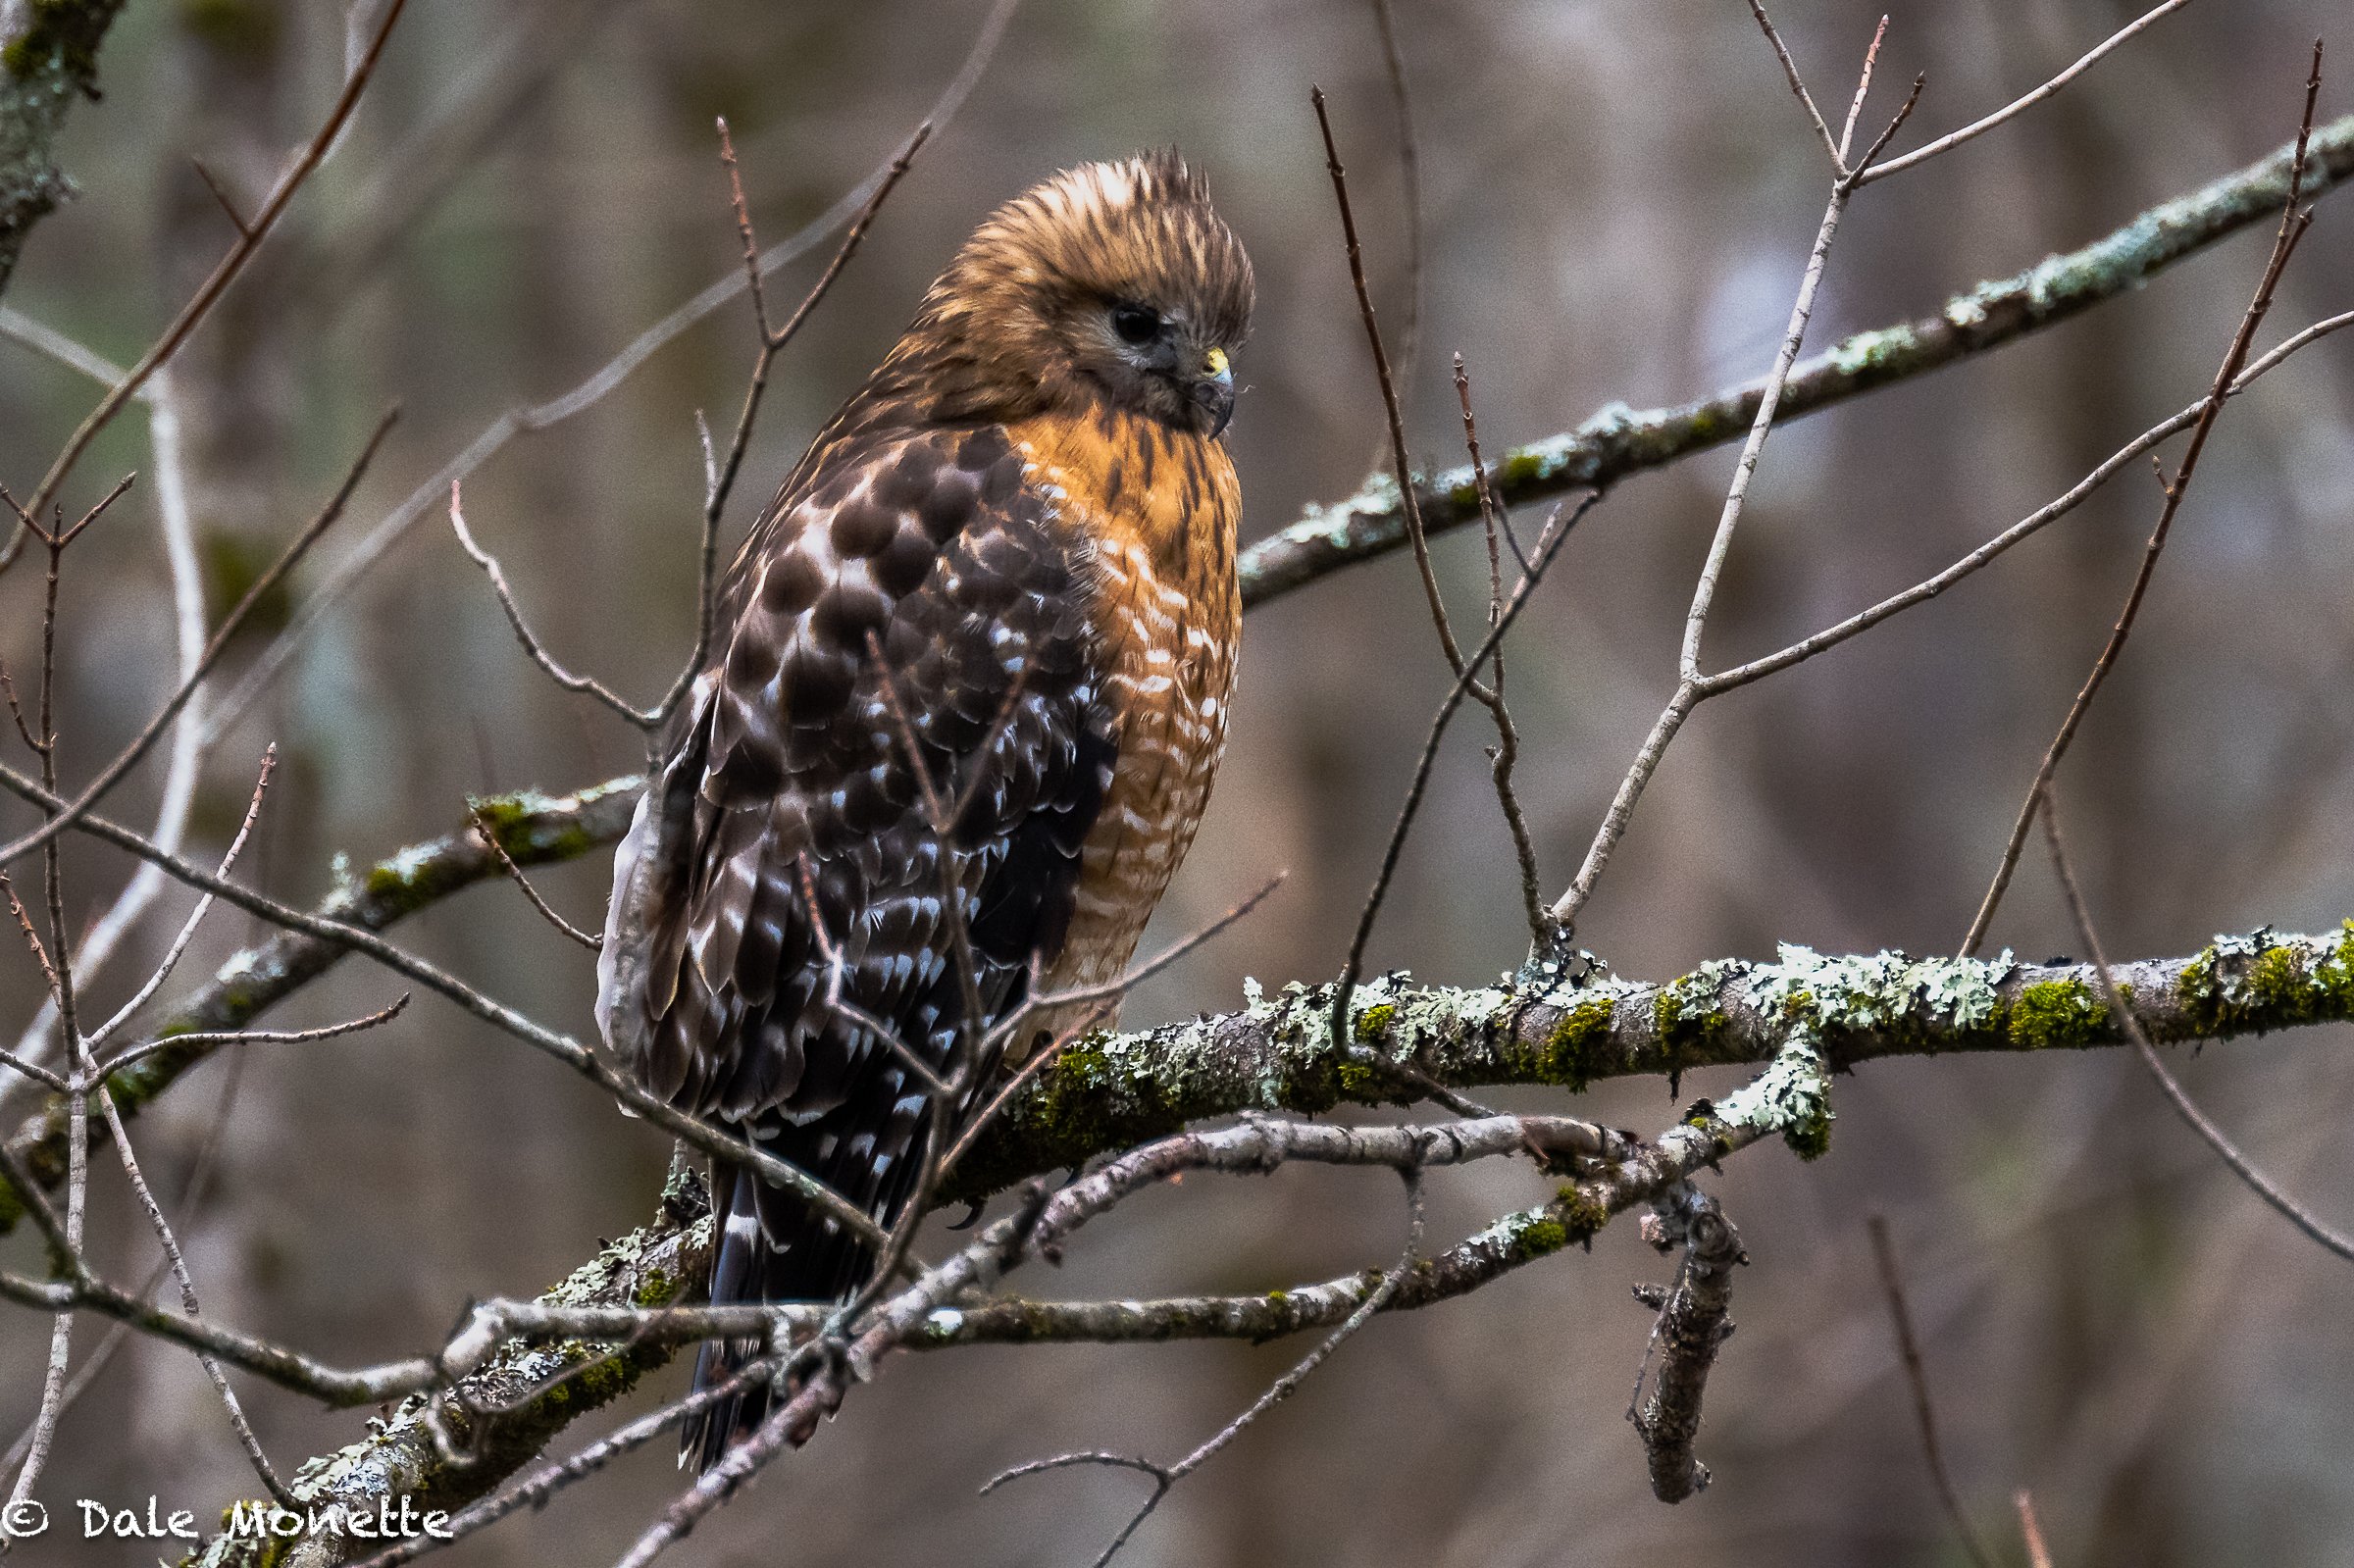   This morning I stumbled upon this red shouldered hawk watching out over a wetland for voles or mice. He was so focused on his food that he never batted an eyelash (feather?) while I took photographs of him at work.  